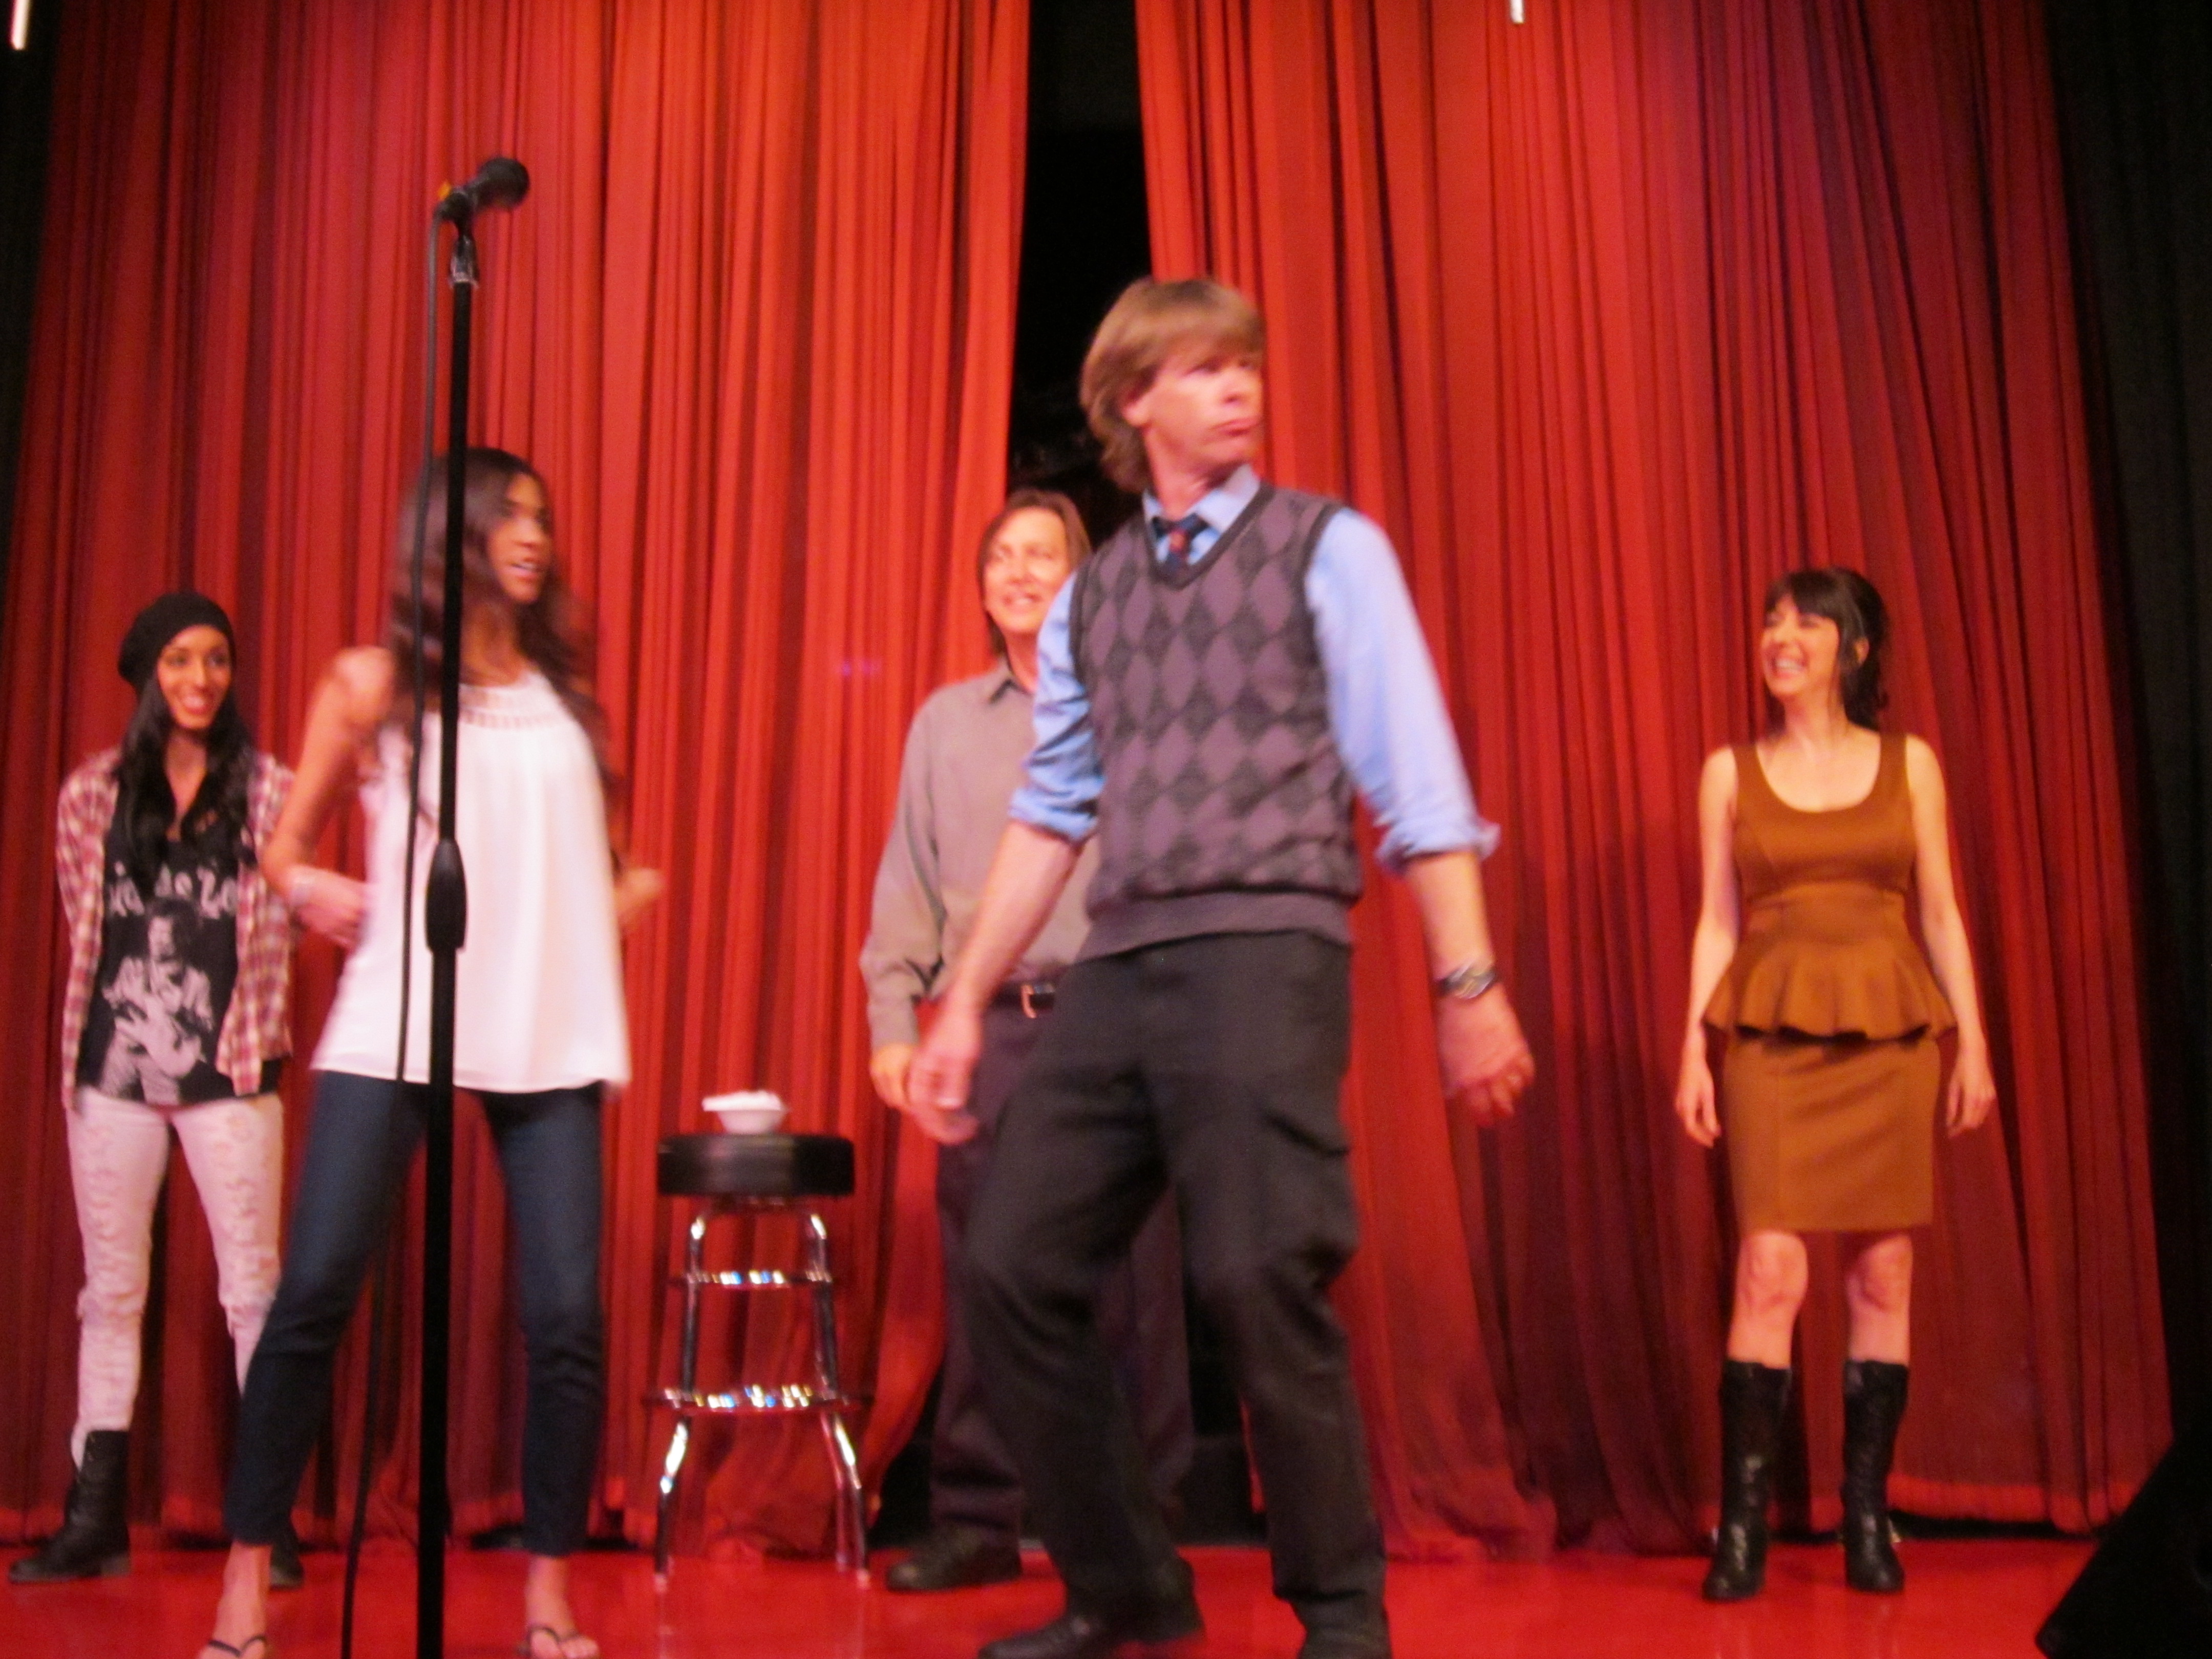 Gregory Graham and Improv Group performing on stage in the main room of the Comedy Store in Hollywood on 2/27/13.